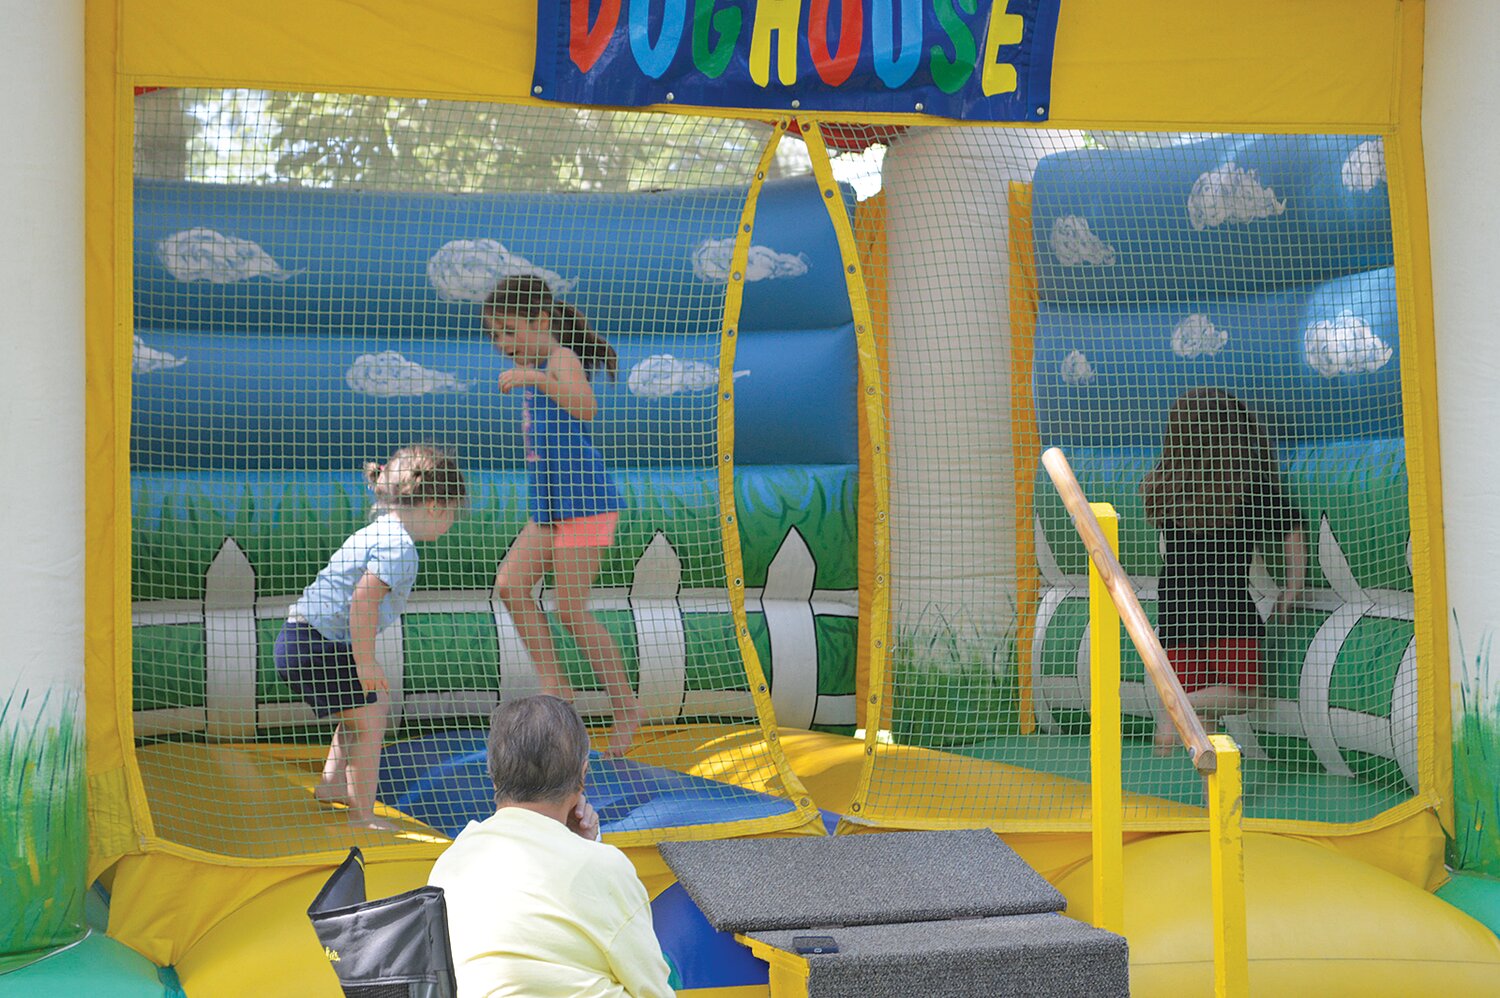 The bounce house is a popular destination in the Children's Area.